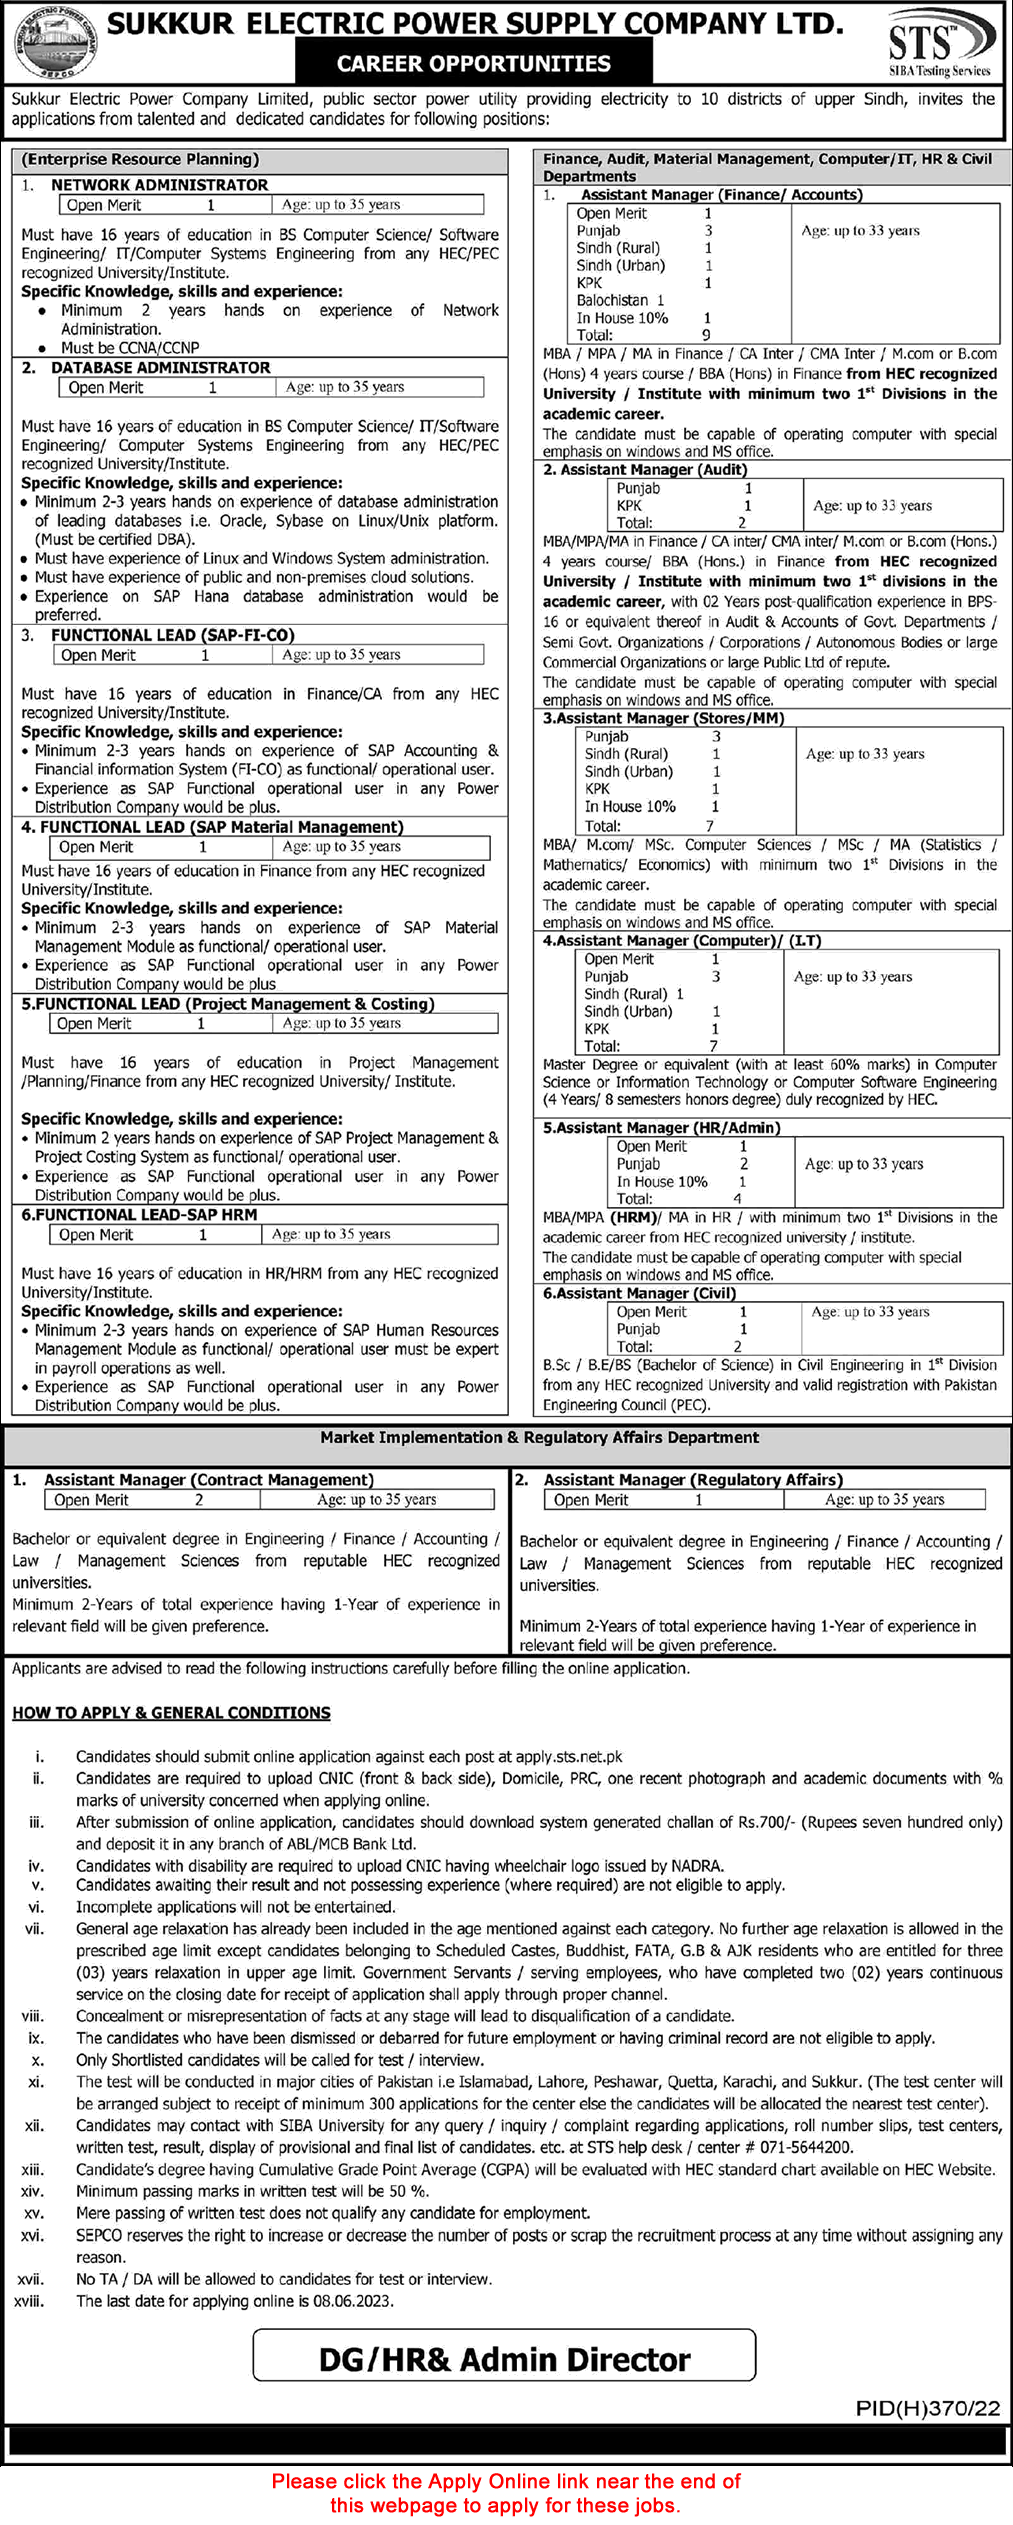 SEPCO Jobs May 2023 STS Apply Online WAPDA Assistant Managers & Others Latest